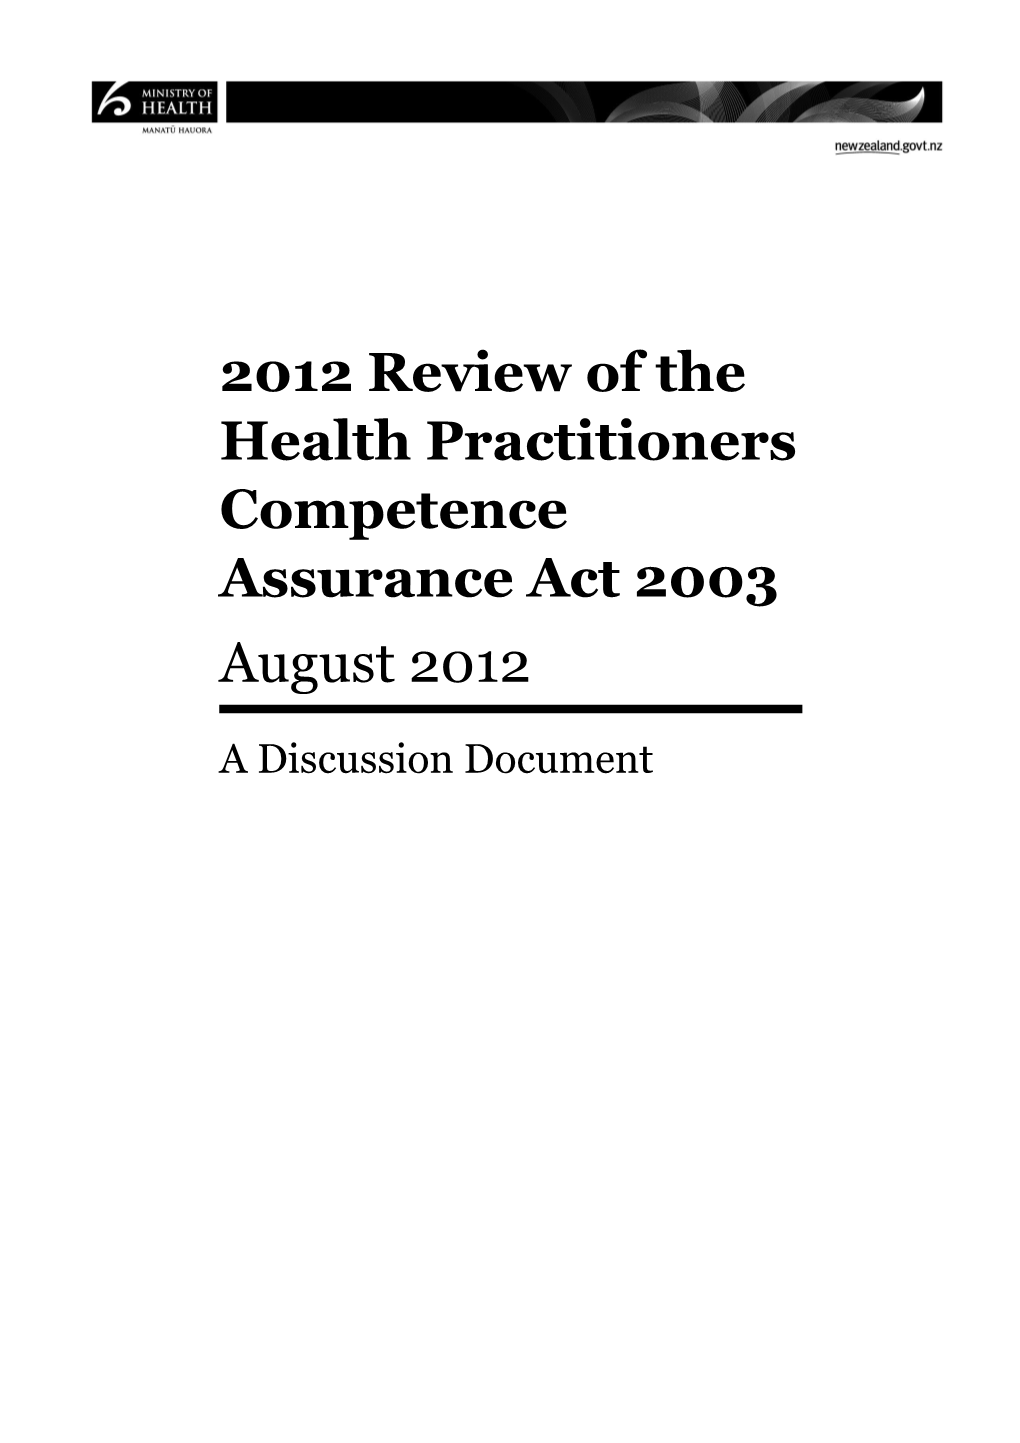 2012 Review of the Health Practitioners Competence Assurance Act 2003